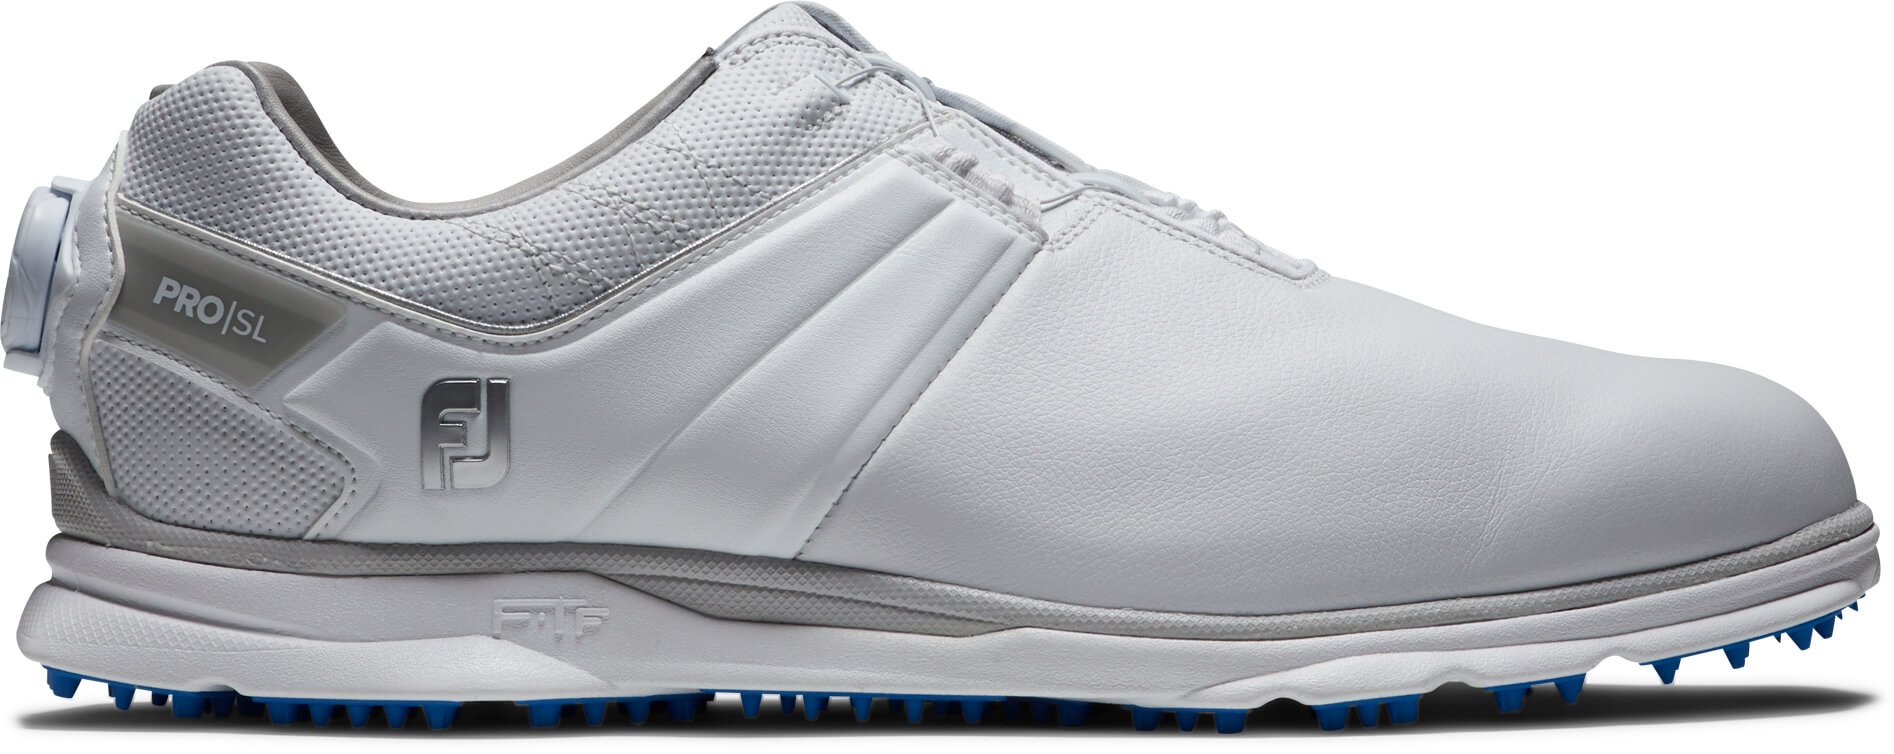 Save 24% on Footjoy Men's Pro/sl Boa Golf Shoes 2023 In White, Size 9, Narrow